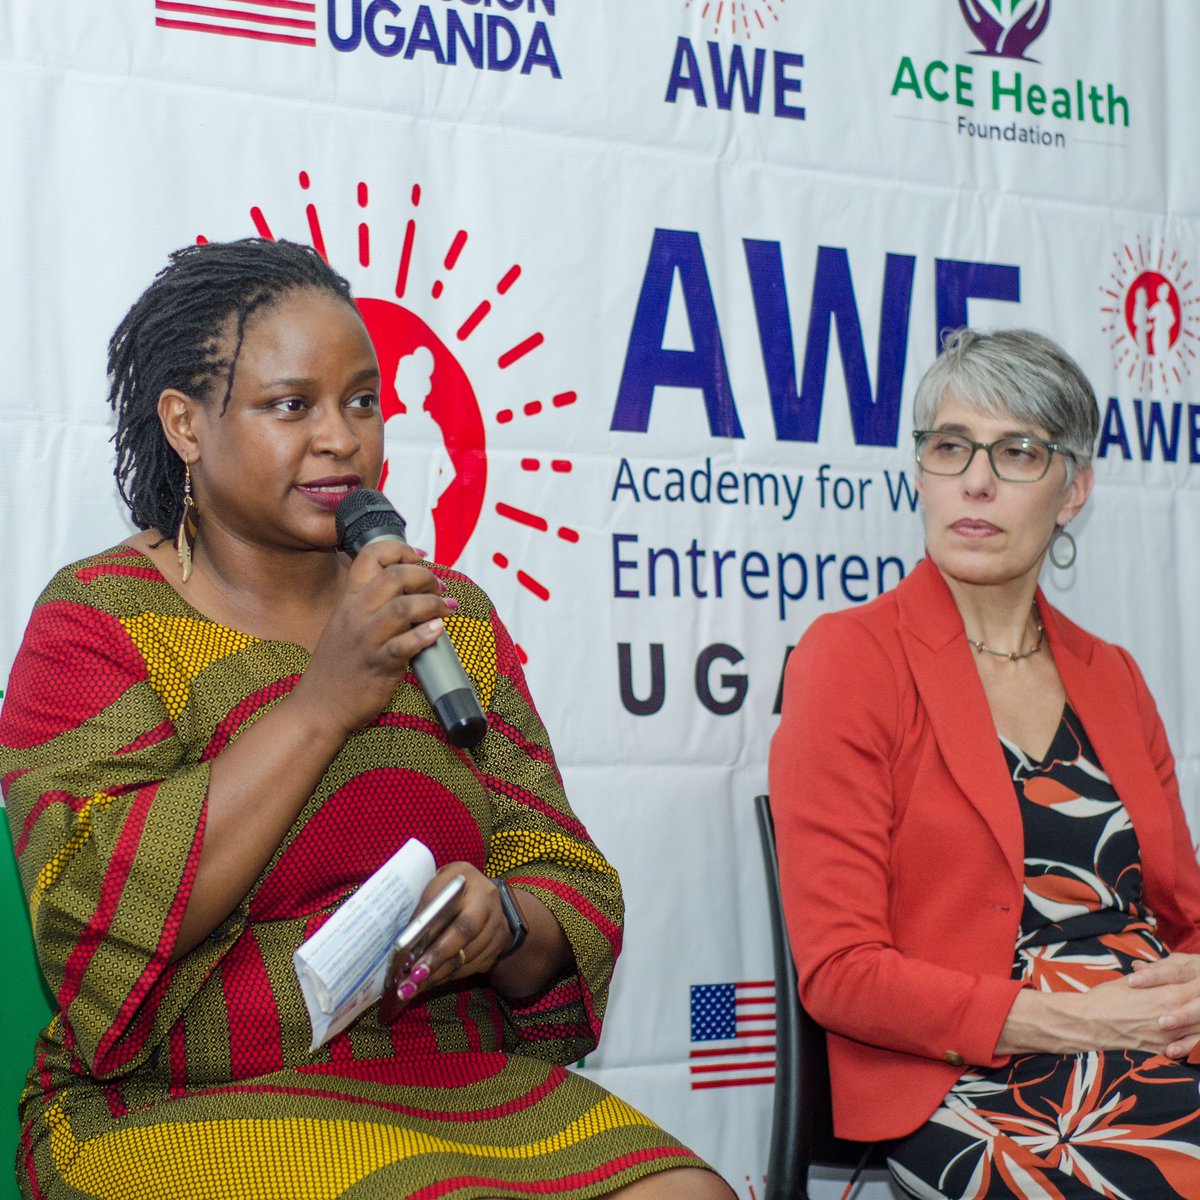 Thank you for honoring our invitation to the #AWECohort4 launch, the last 4years have had us facing a lot of challenges due to covid. The fact that we are here as ladies in business speaks that we are successful no matter the challenges. - @FionaNLuswata #AWEinUganda